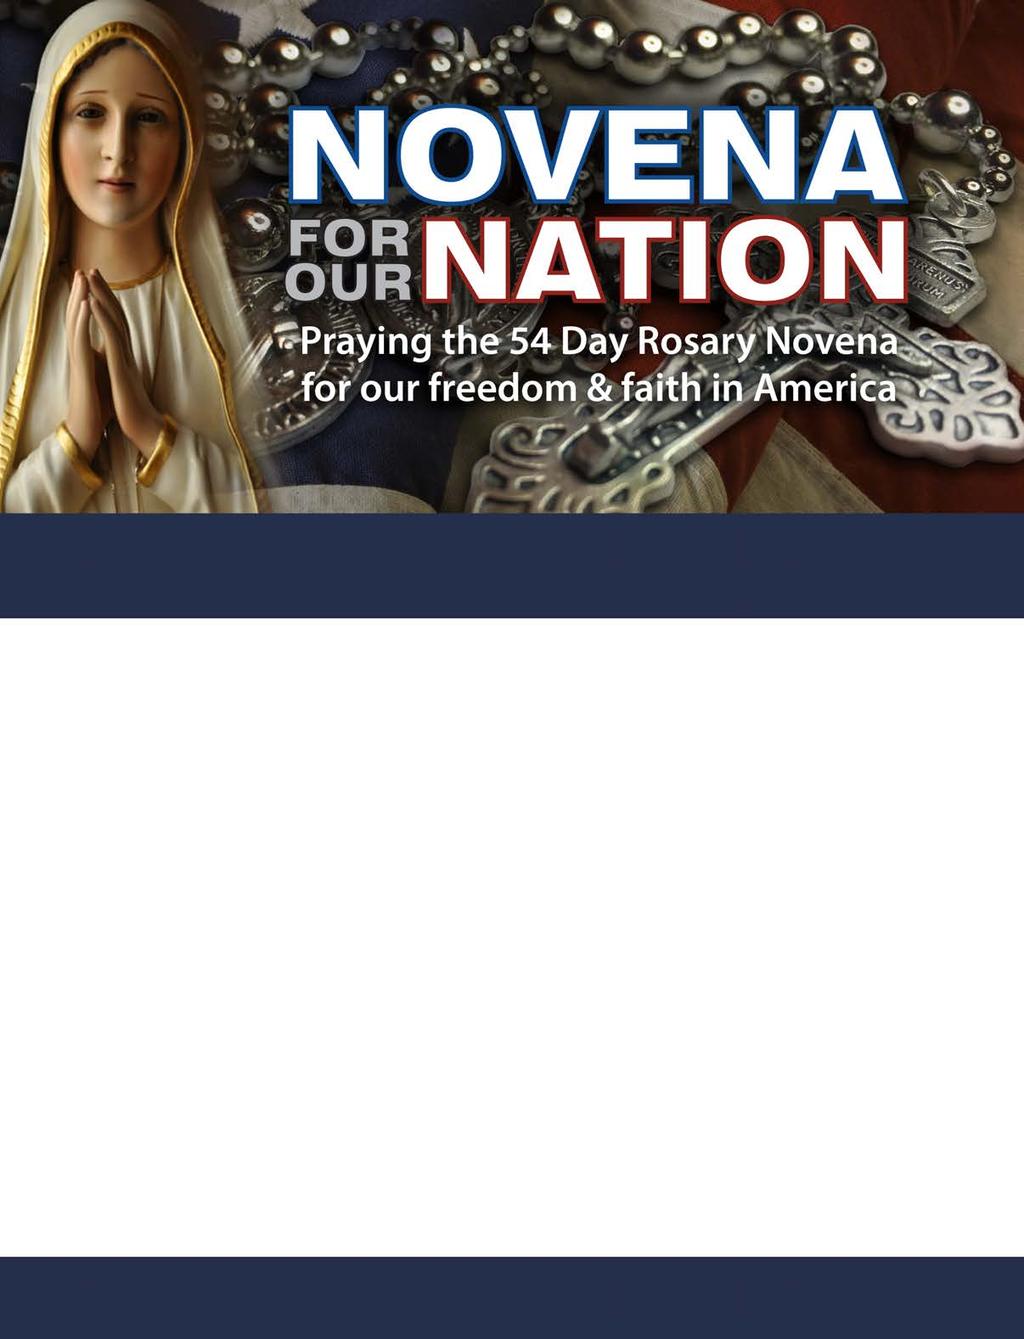 August 15th through October 7, 2018 The time is now to call upon God, through the powerful intercession of Our Lady of the Rosary, to heal our country and return it to holiness.